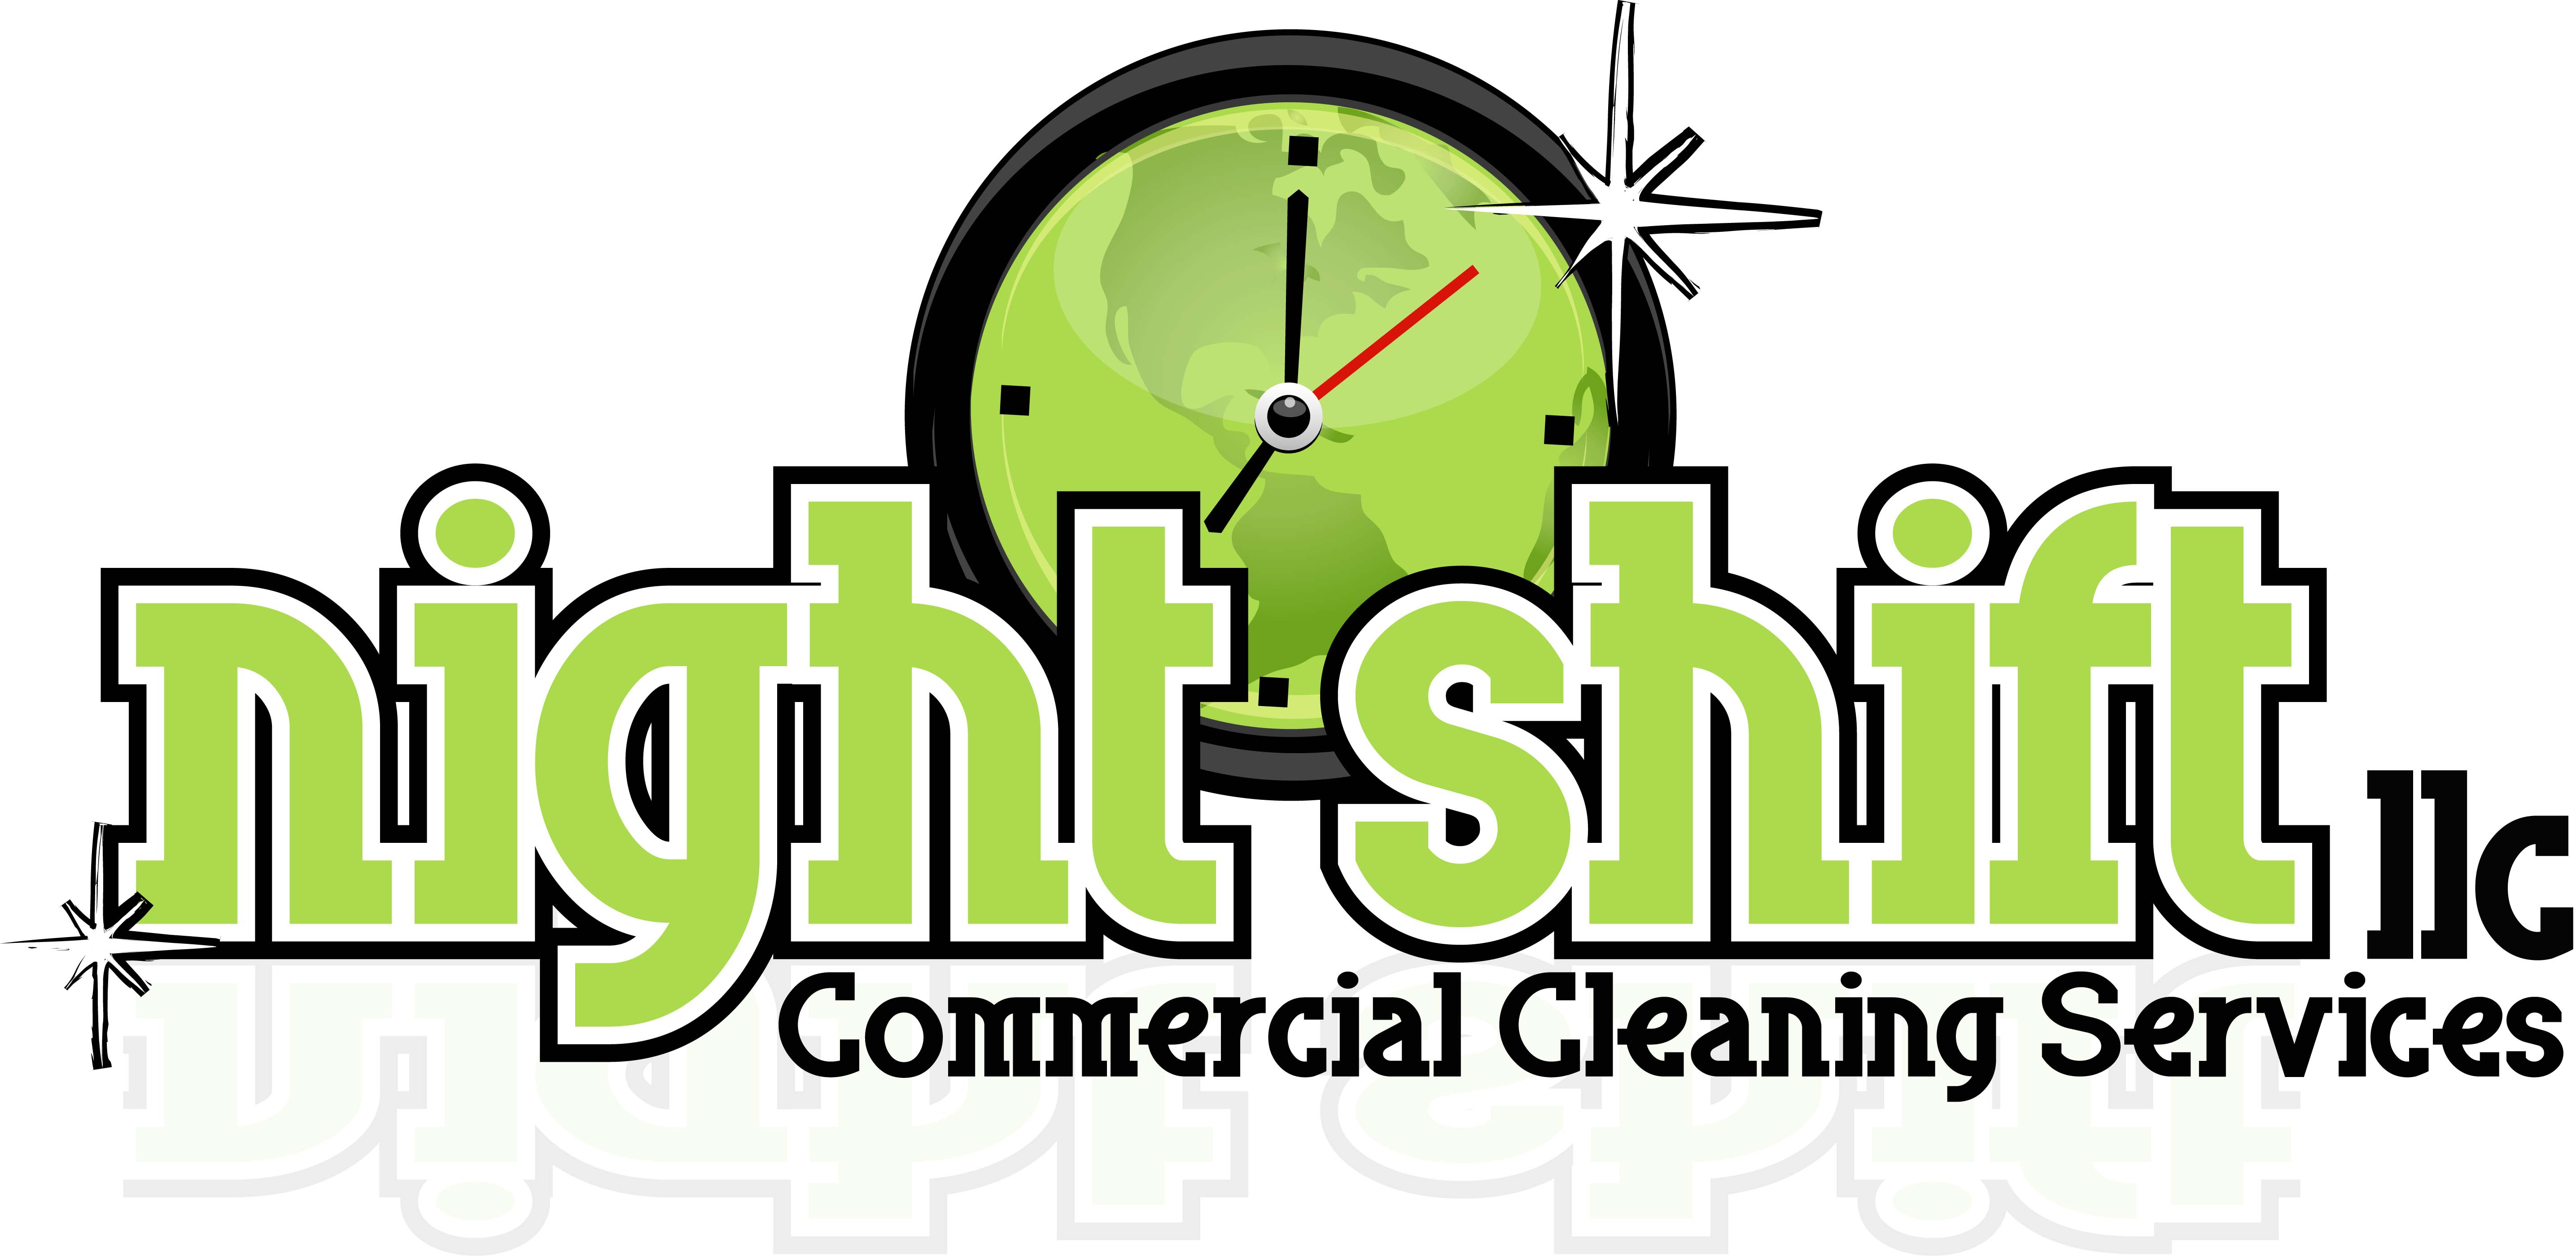 HUMBLY SUPERIOR CLEANING SERVICES Logo